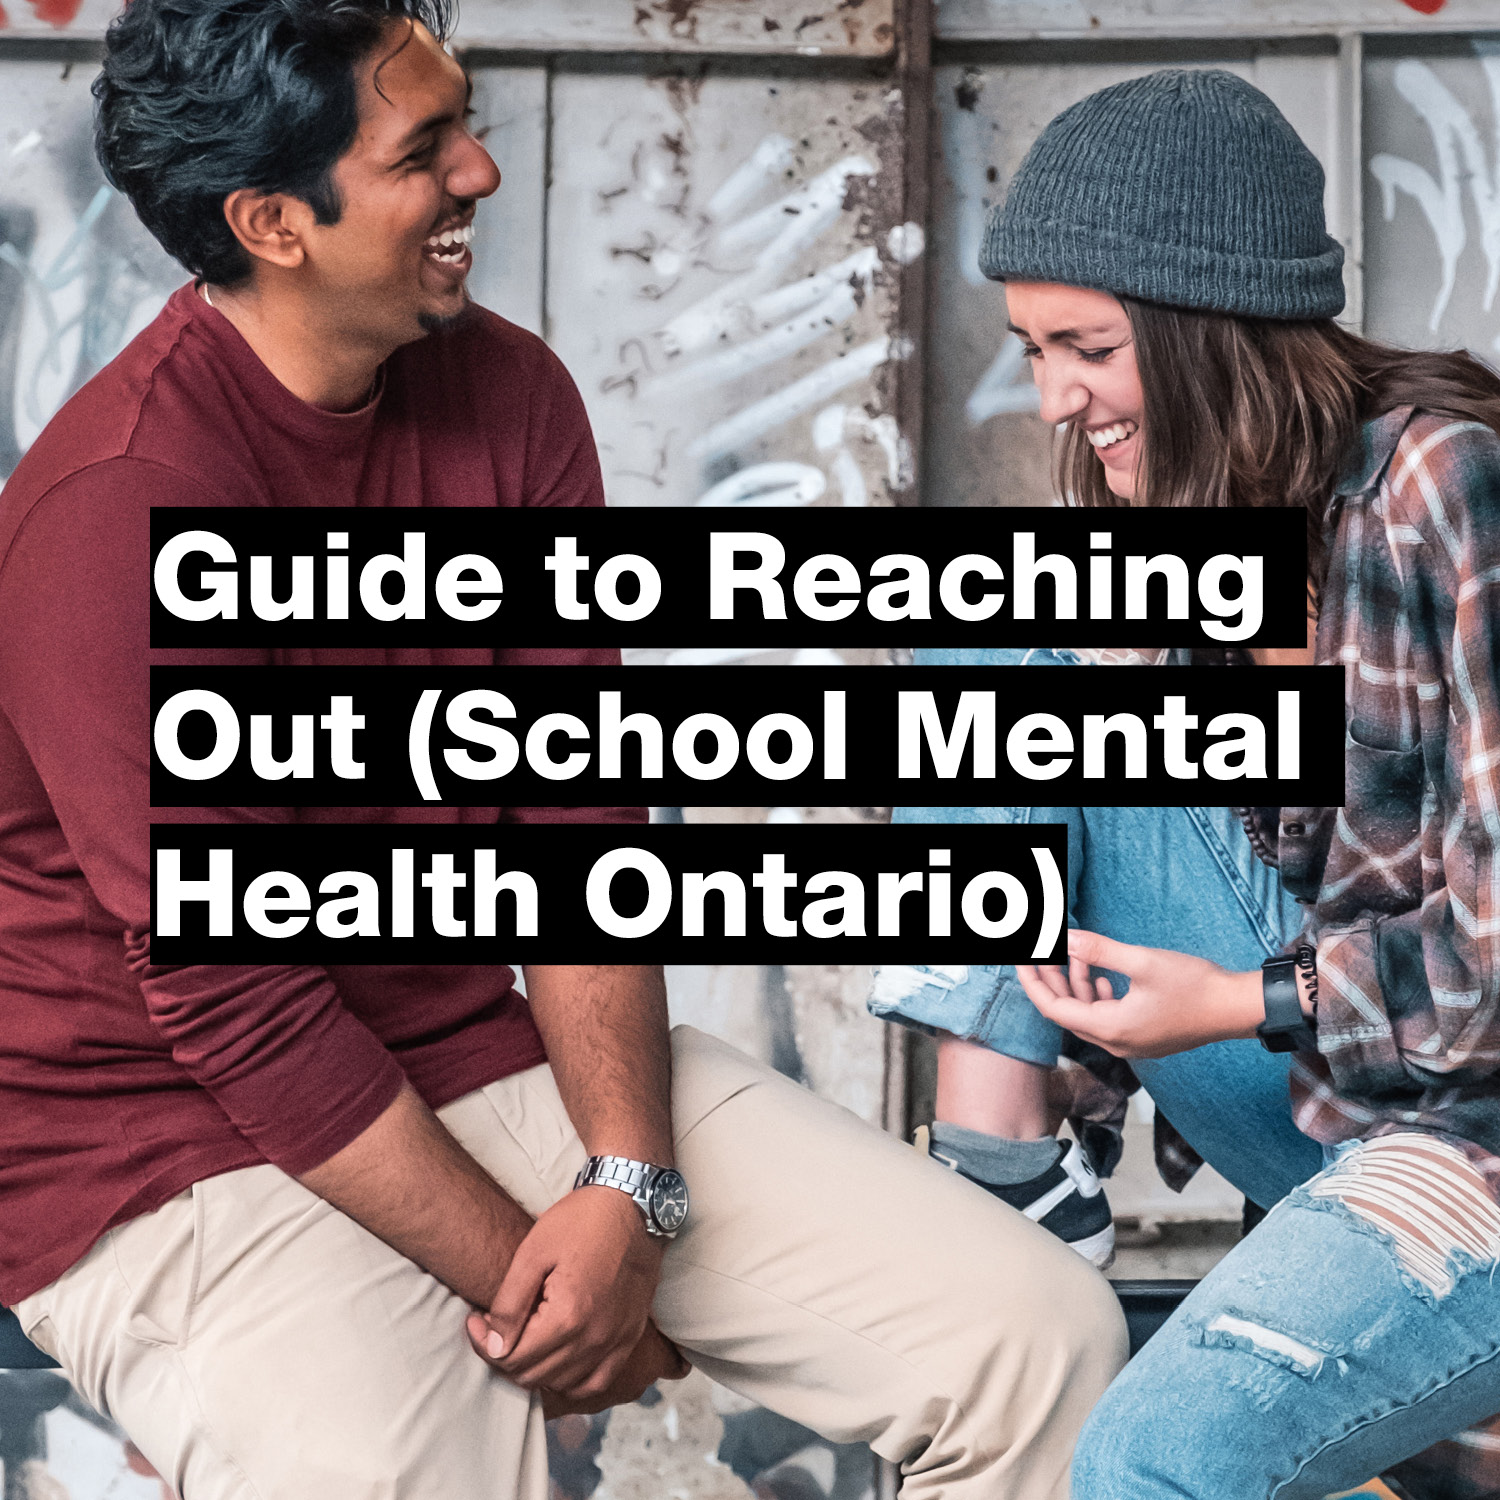 Guide to Reaching Out (School Mental Health Ontario)